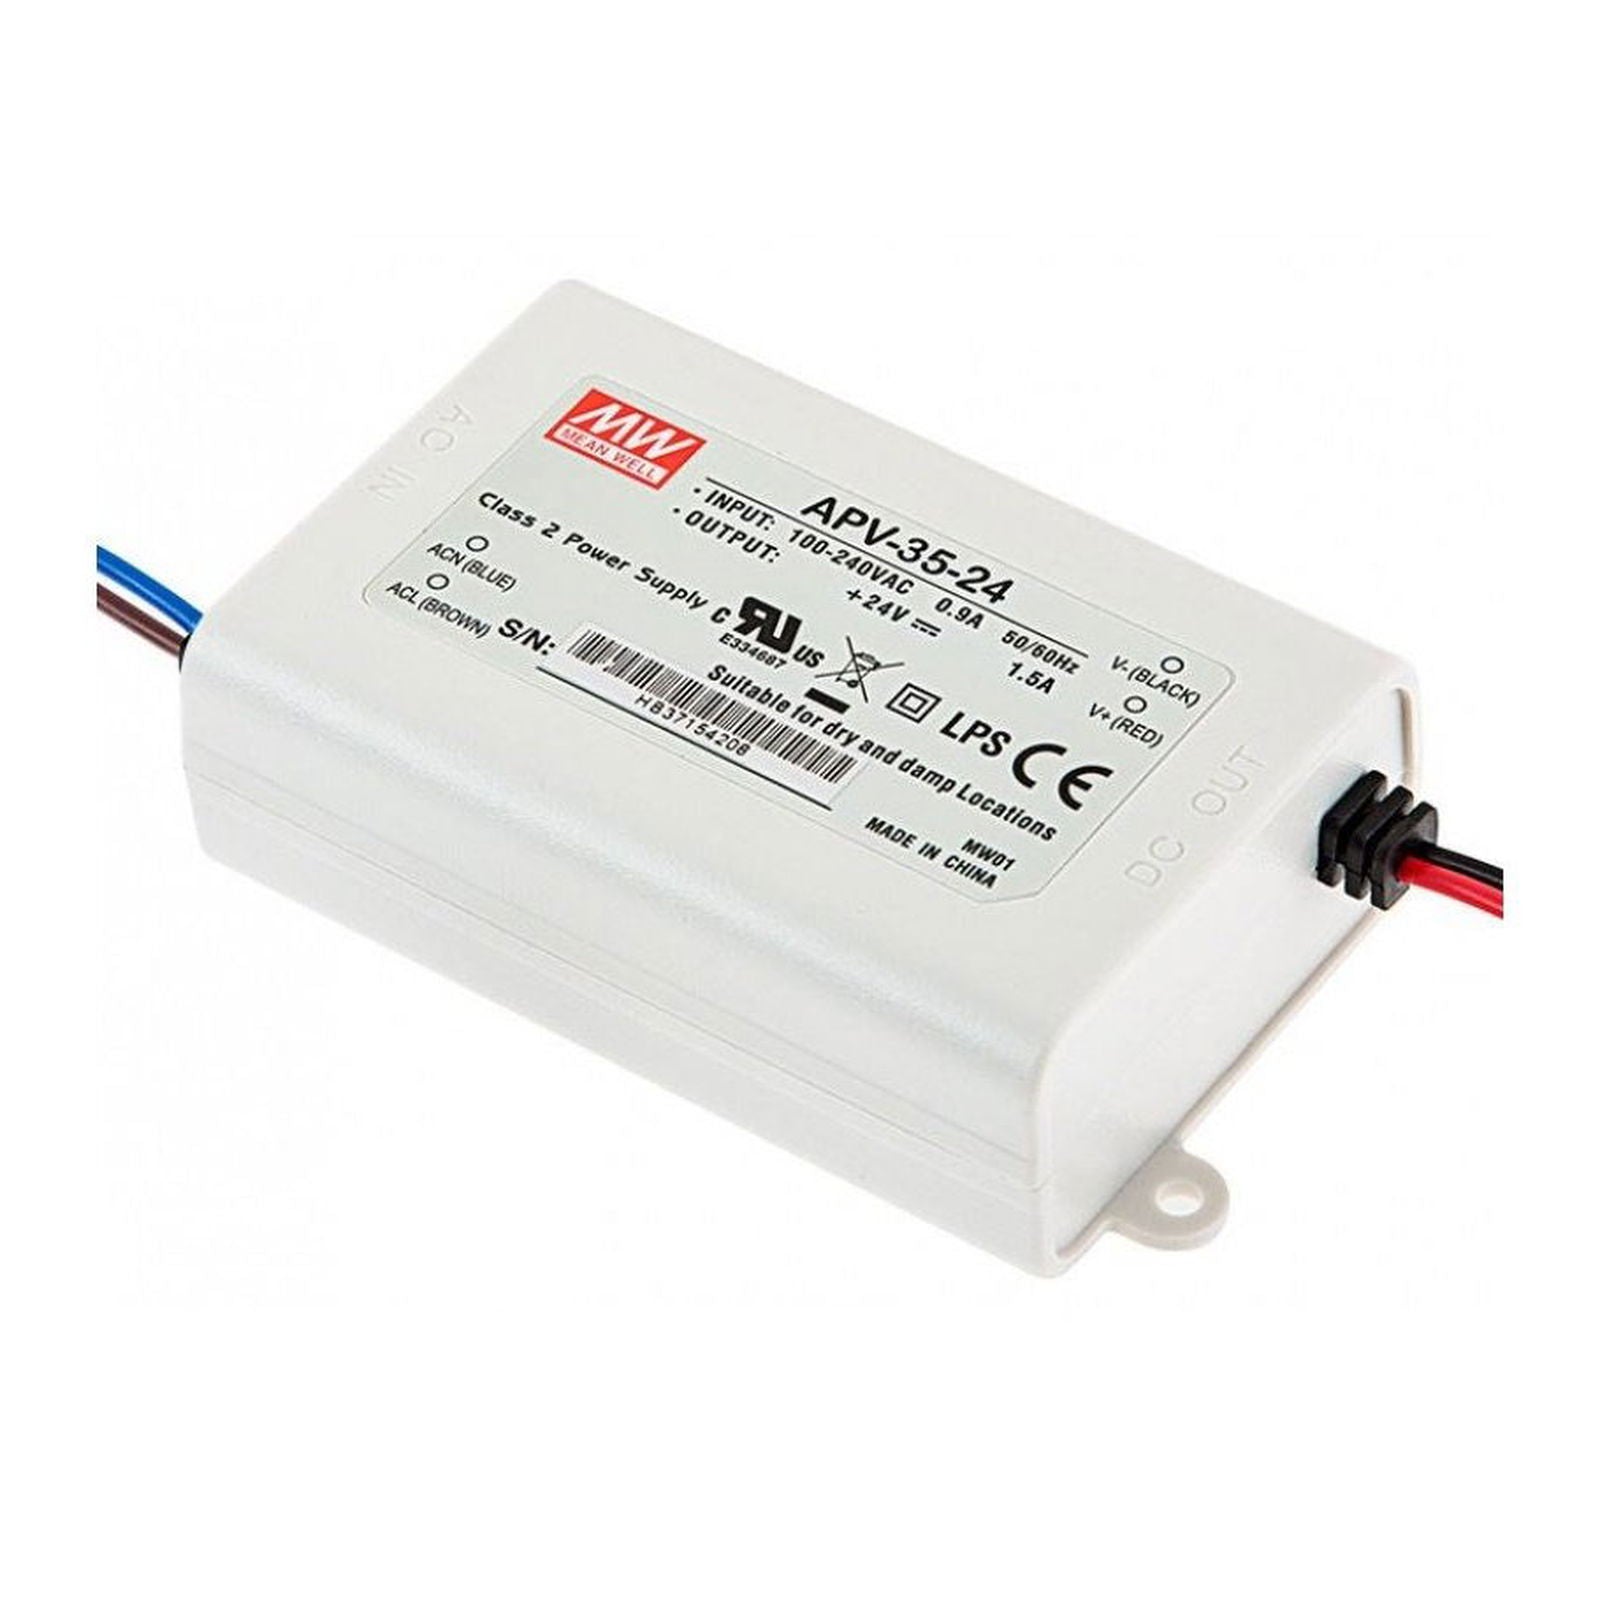 Meanwell APV-35-24 35W 24V DC LED Driver | Efficient Power Supply for LED Illumination - voltkart - MEANWELL - 